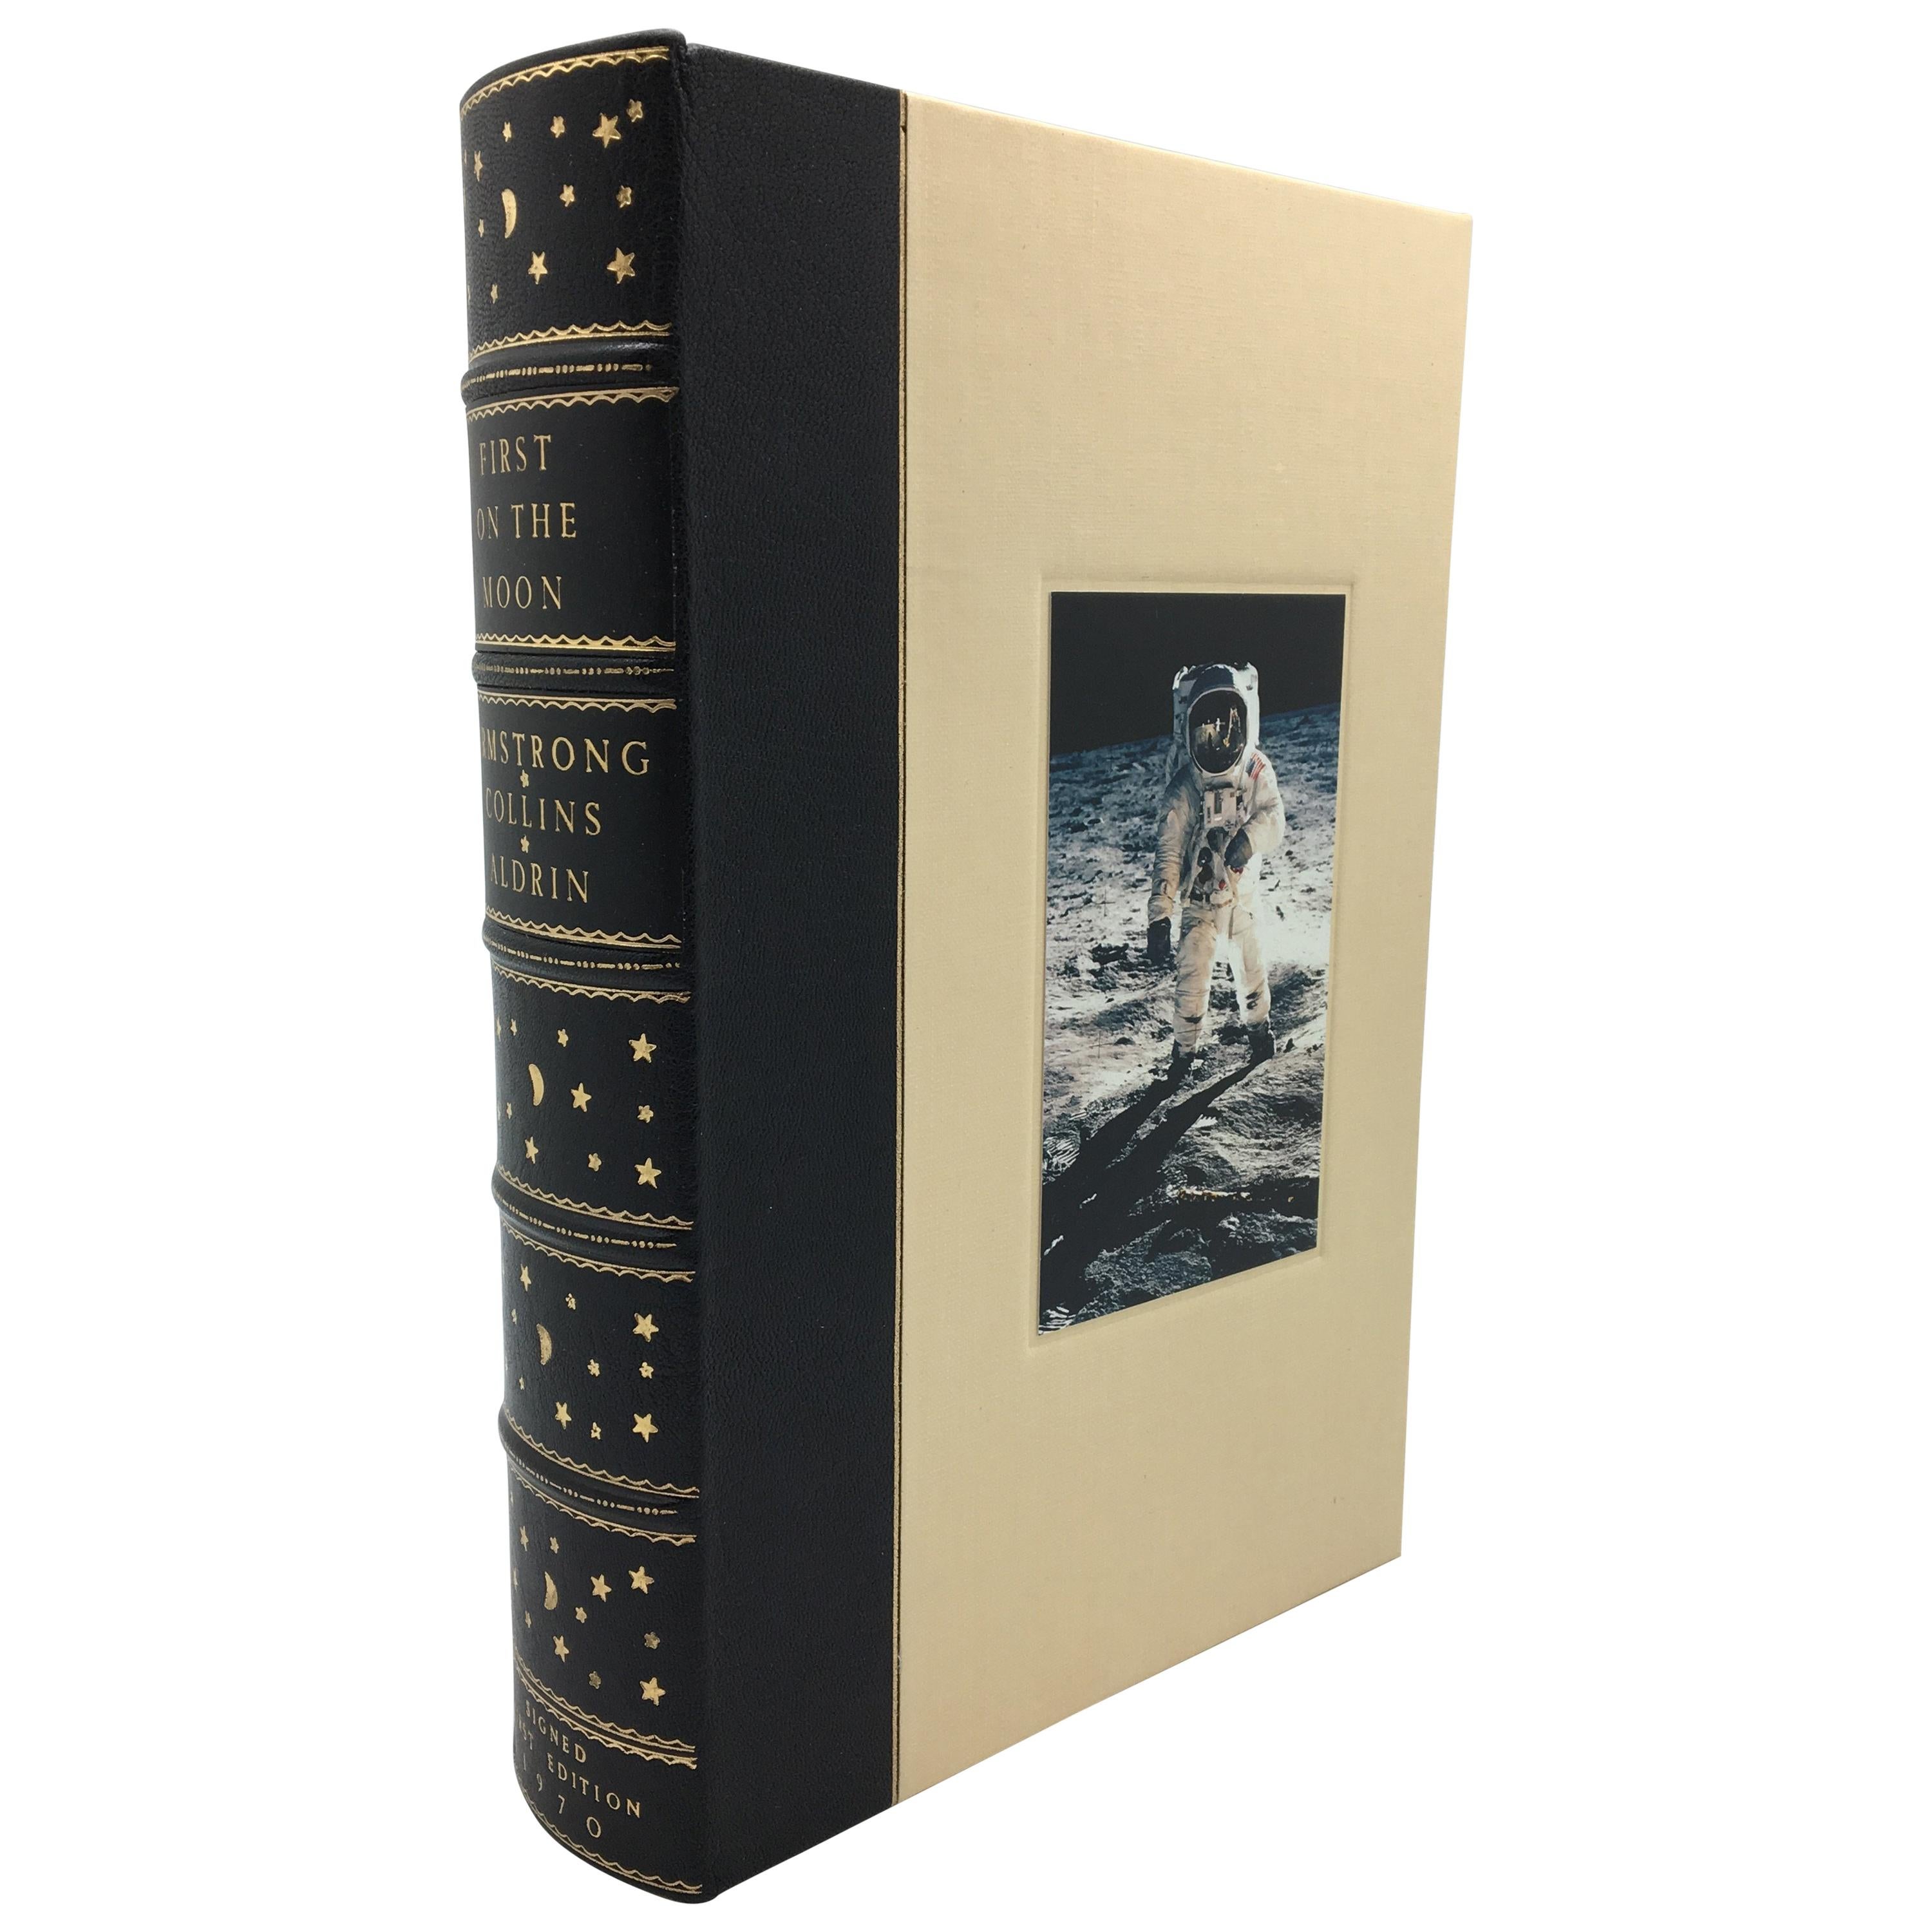 First on the Moon: a Voyage, First Edition, Includes Buzz Aldrin Signature, 1970